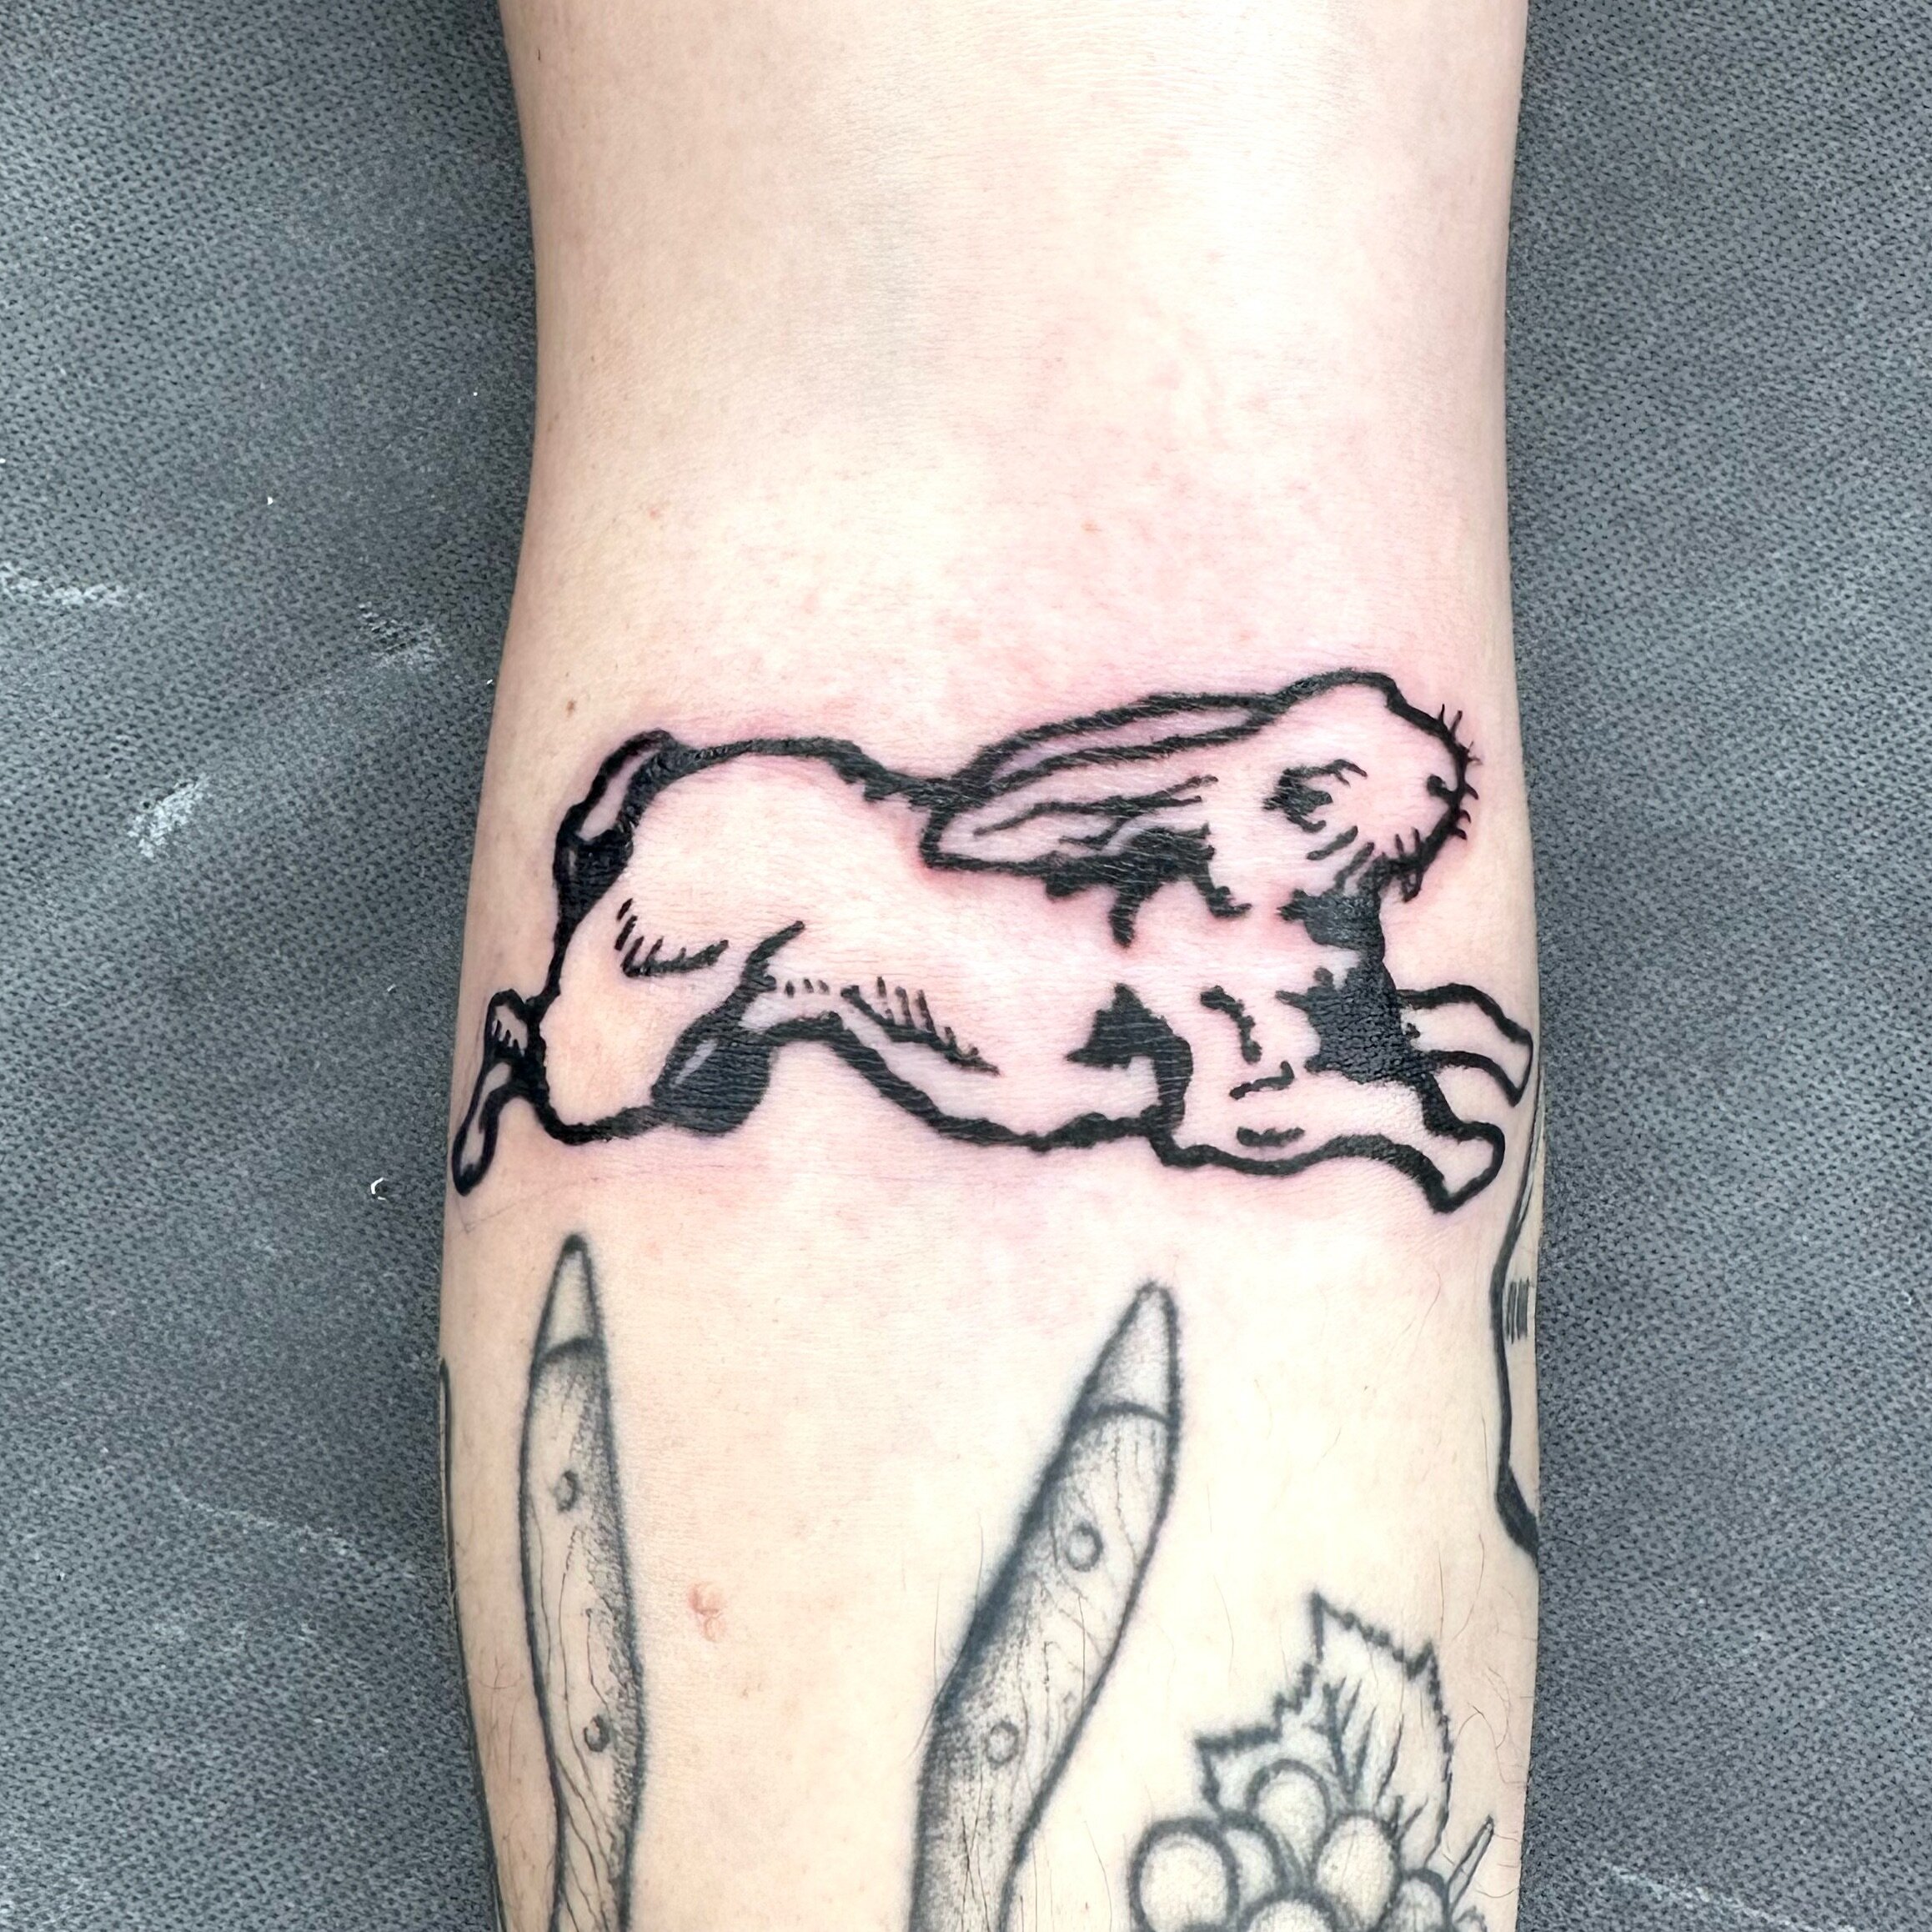 got to do this rabbit stamp right over the ditch on my chiller @alexhasacanon the other day, I love doing anime and manga pieces but I still love doing fun little stuff like this too, dm me to set something up!
.
.
.
.
.
.
.
.
.
#stamptattoo #linewor